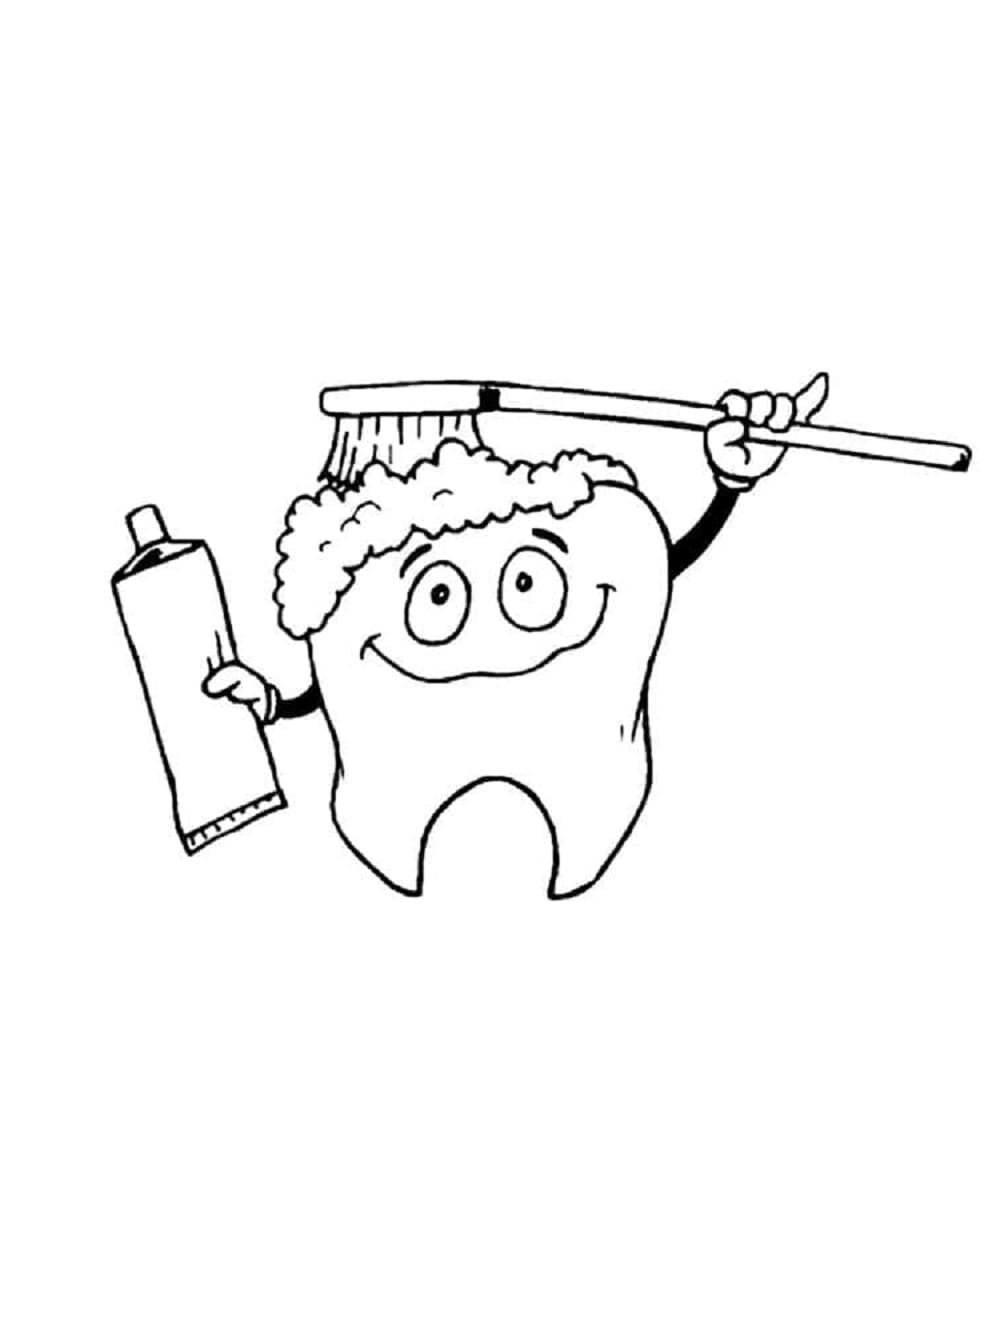 Printable Cartoon Brushing Tooth Hyigene Coloring Page